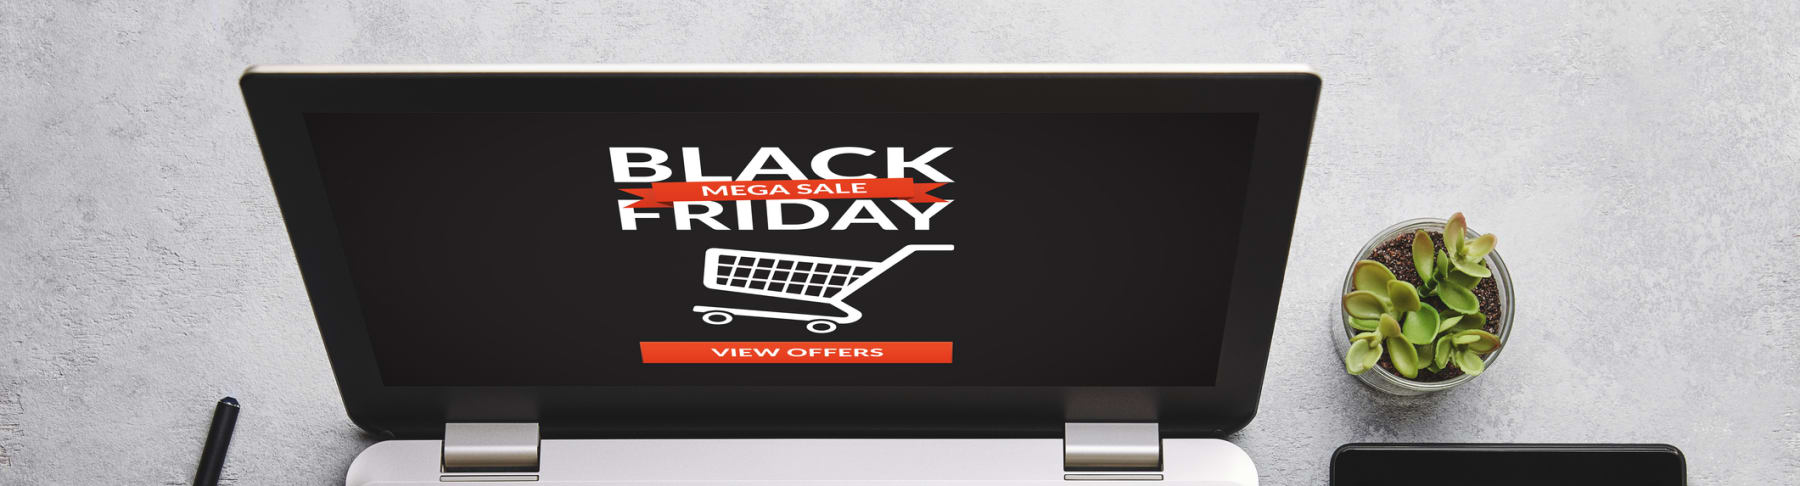 Black Friday page on laptop.